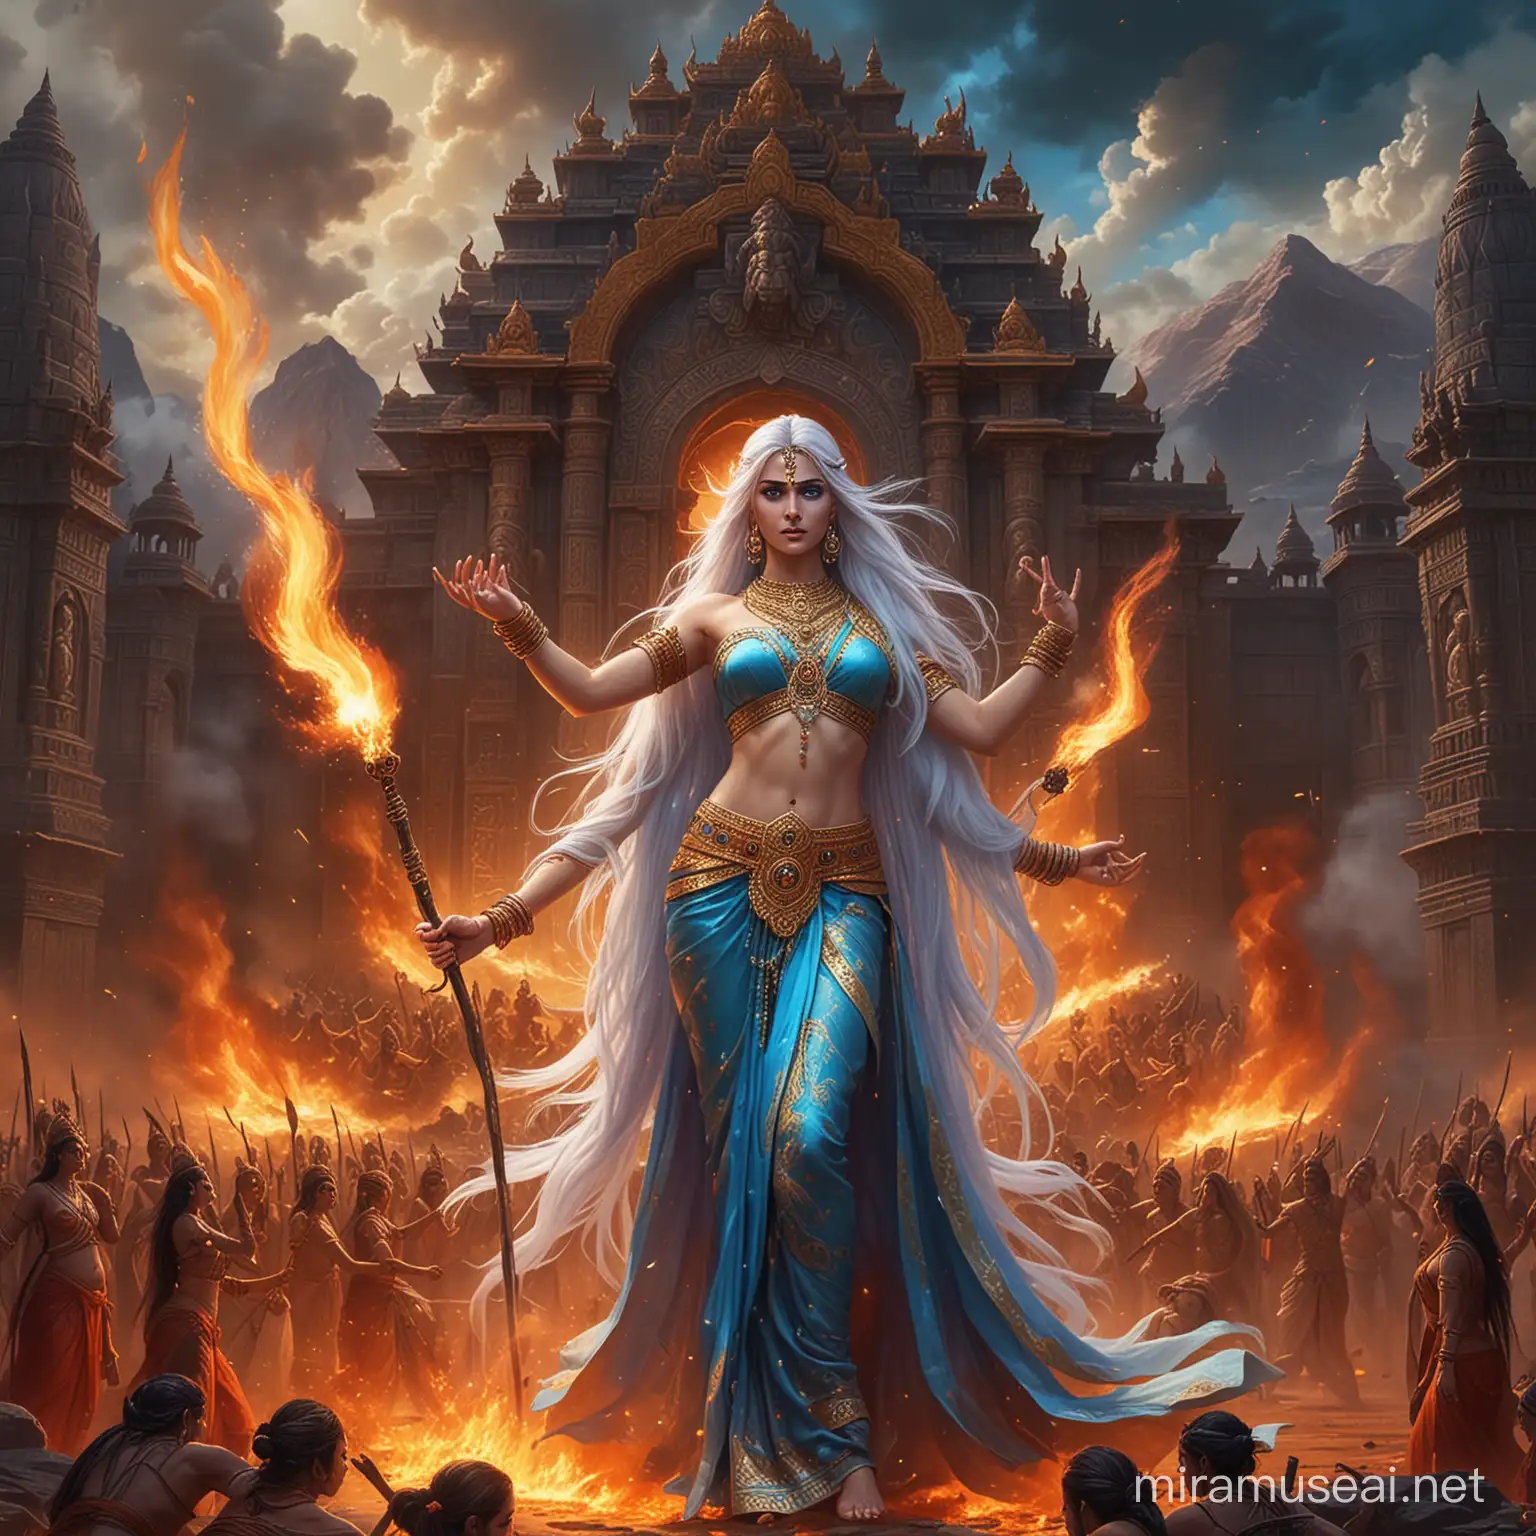 Powerful Hindu Empress Goddess Surrounded by Fire and Demonic Goddesses